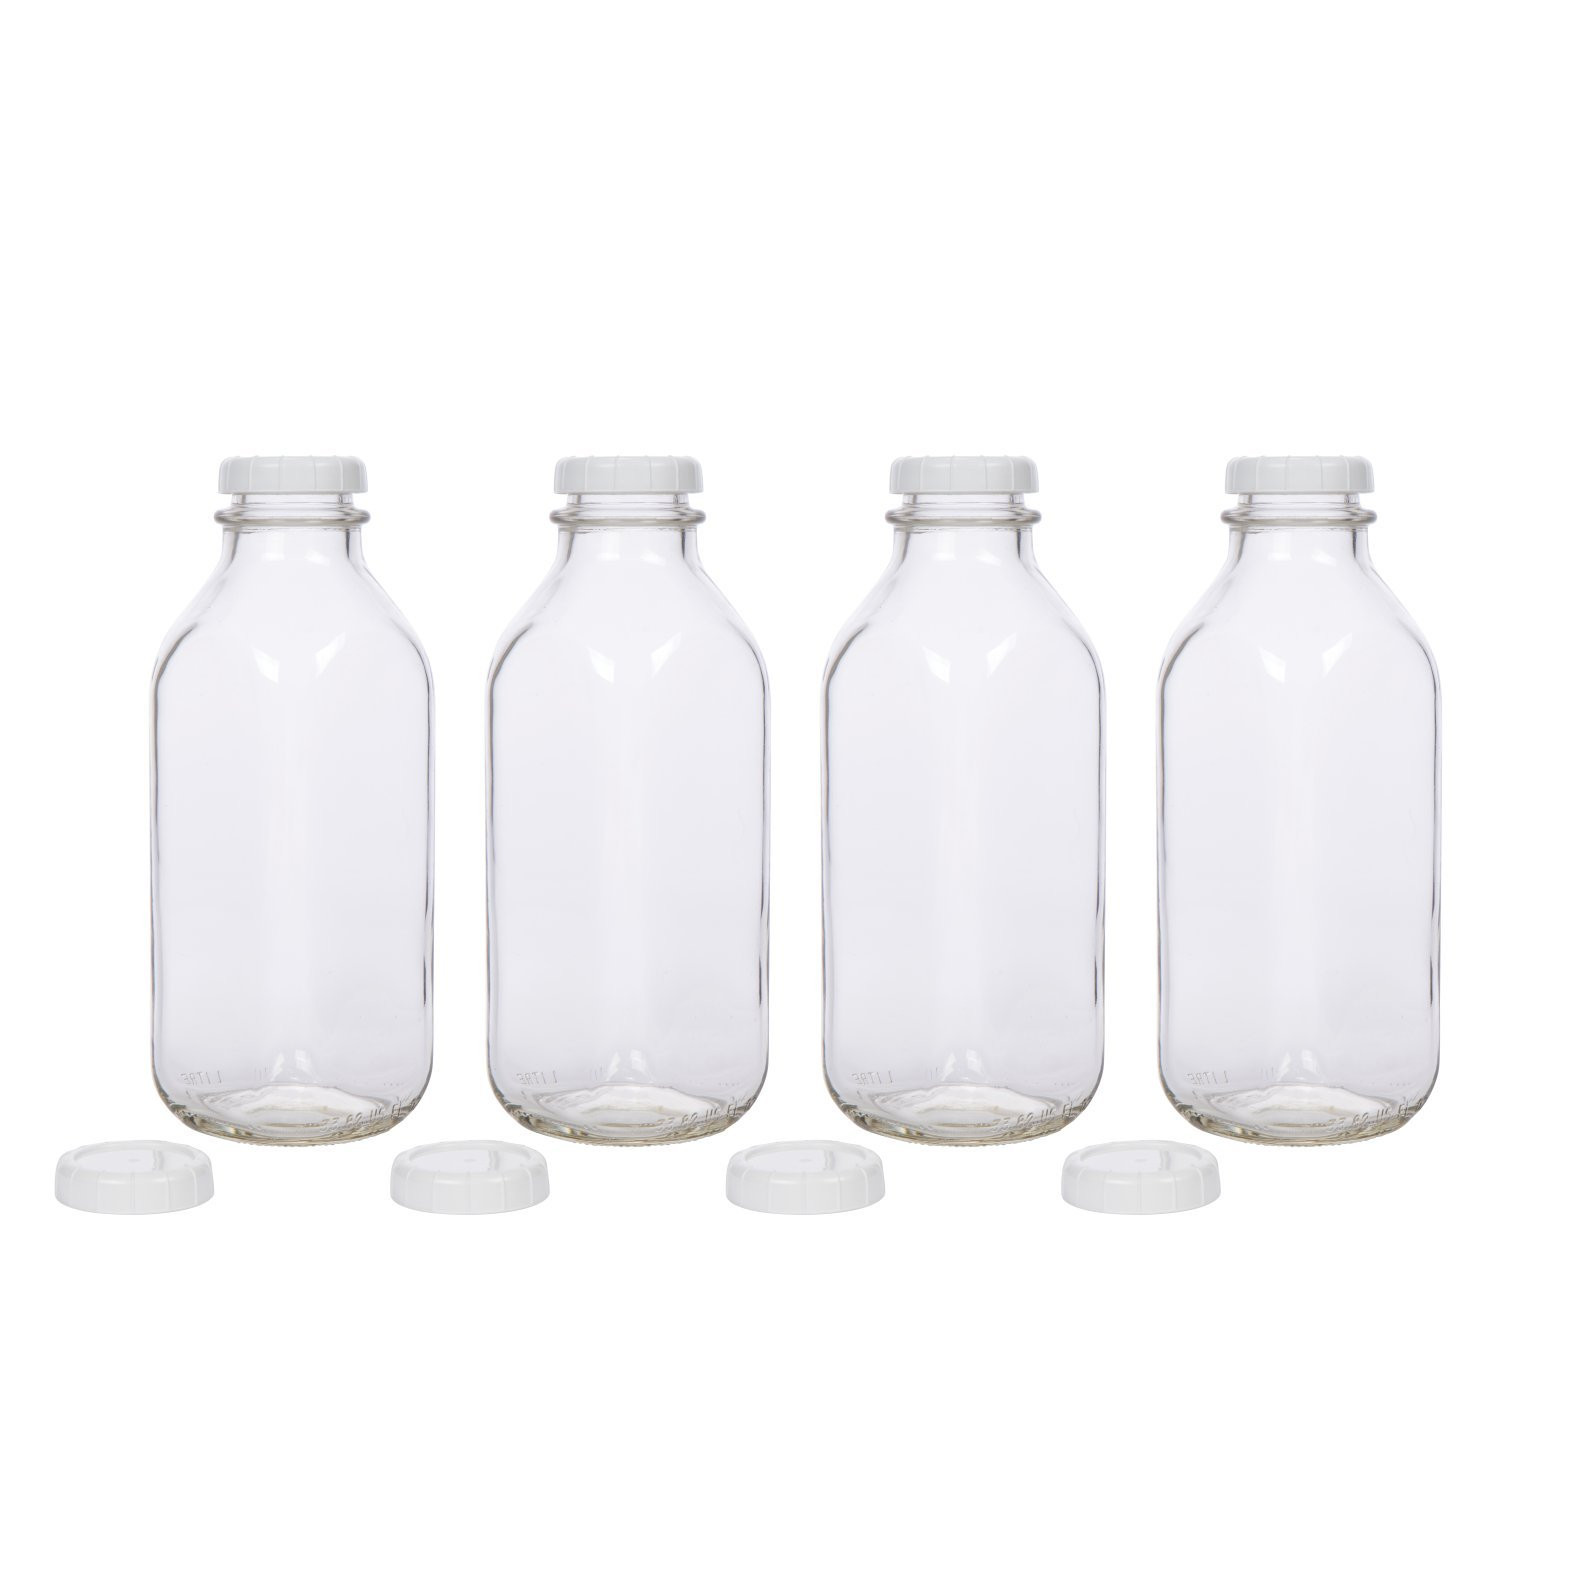 21 Fantastic Glass Milk Jug Vase 2024 free download glass milk jug vase of best rated in carafes pitchers helpful customer reviews amazon com within glass milk bottles usa made 33 8 oz jugs with extra lids set of 4